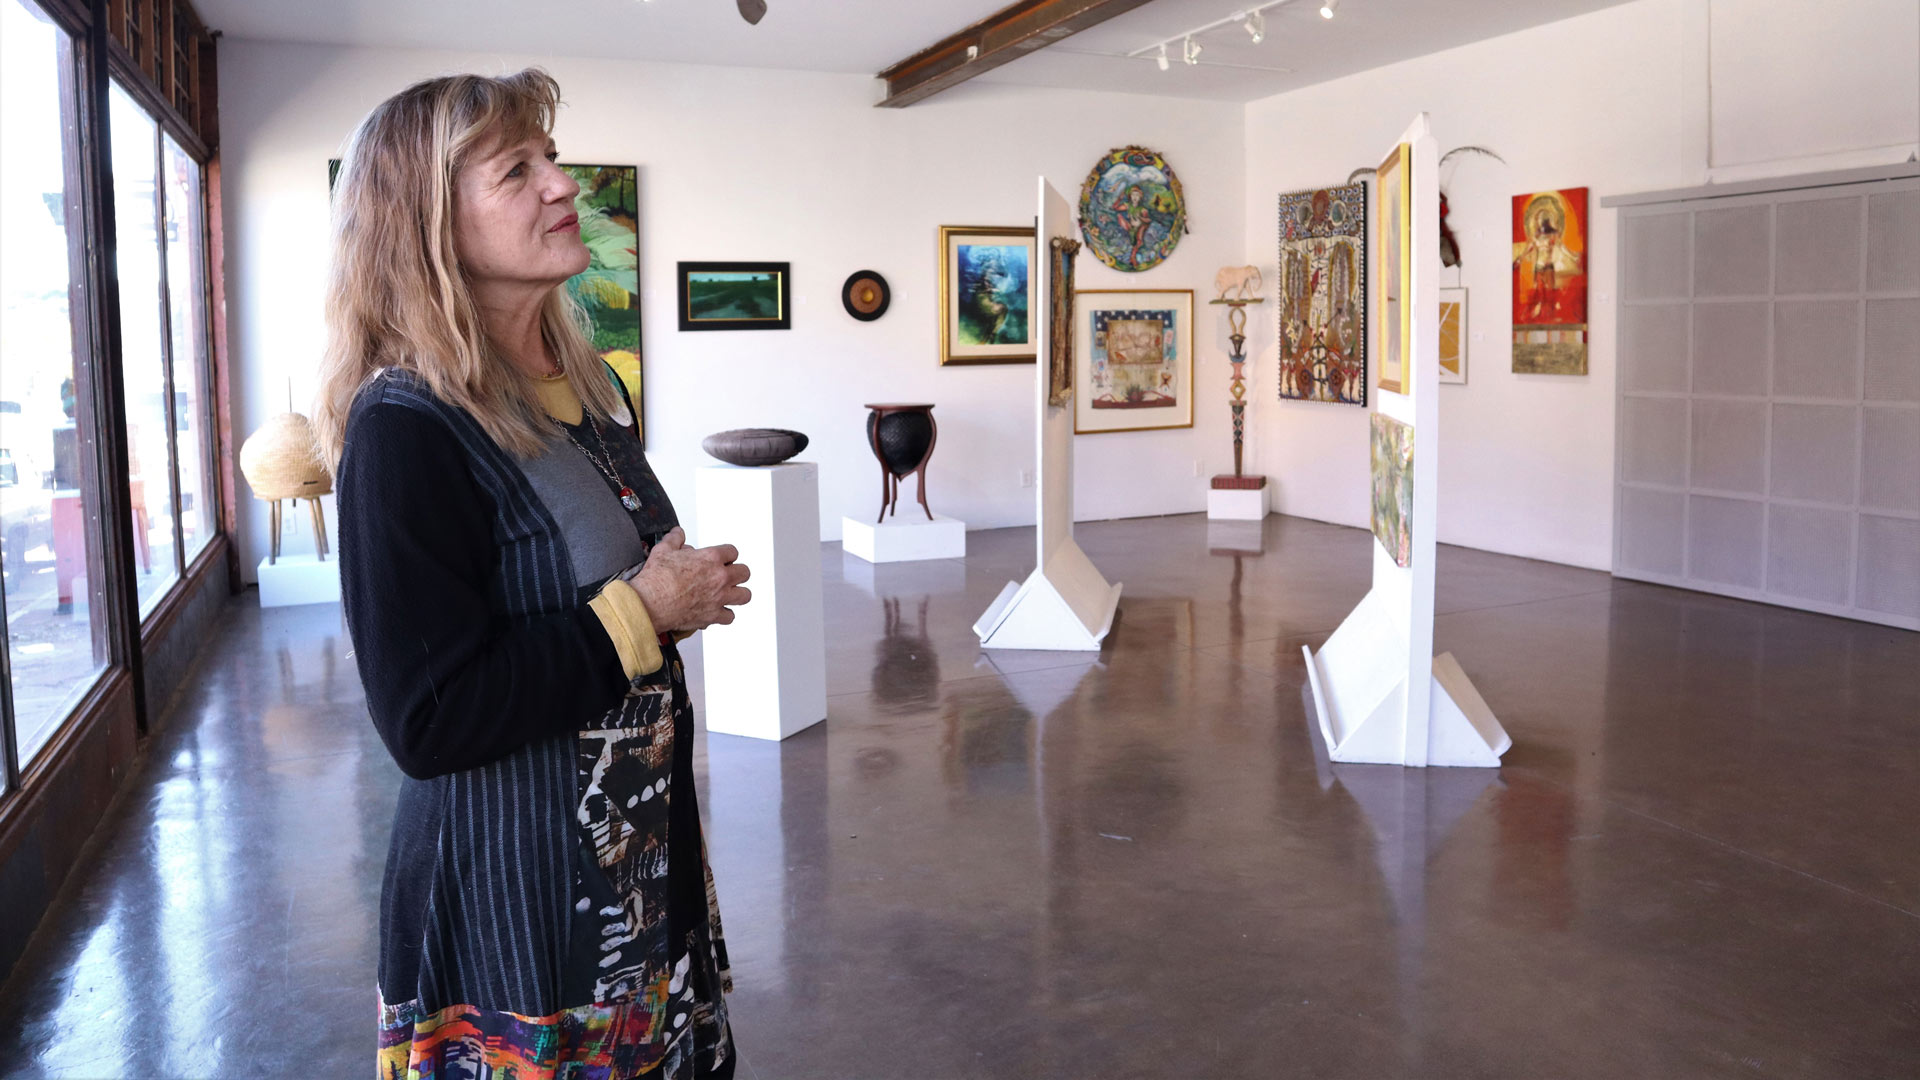 Sharon Stetter, co-chair of the Bisbee Arts Commission showcases an exhibit of 130 local artists. November 2022